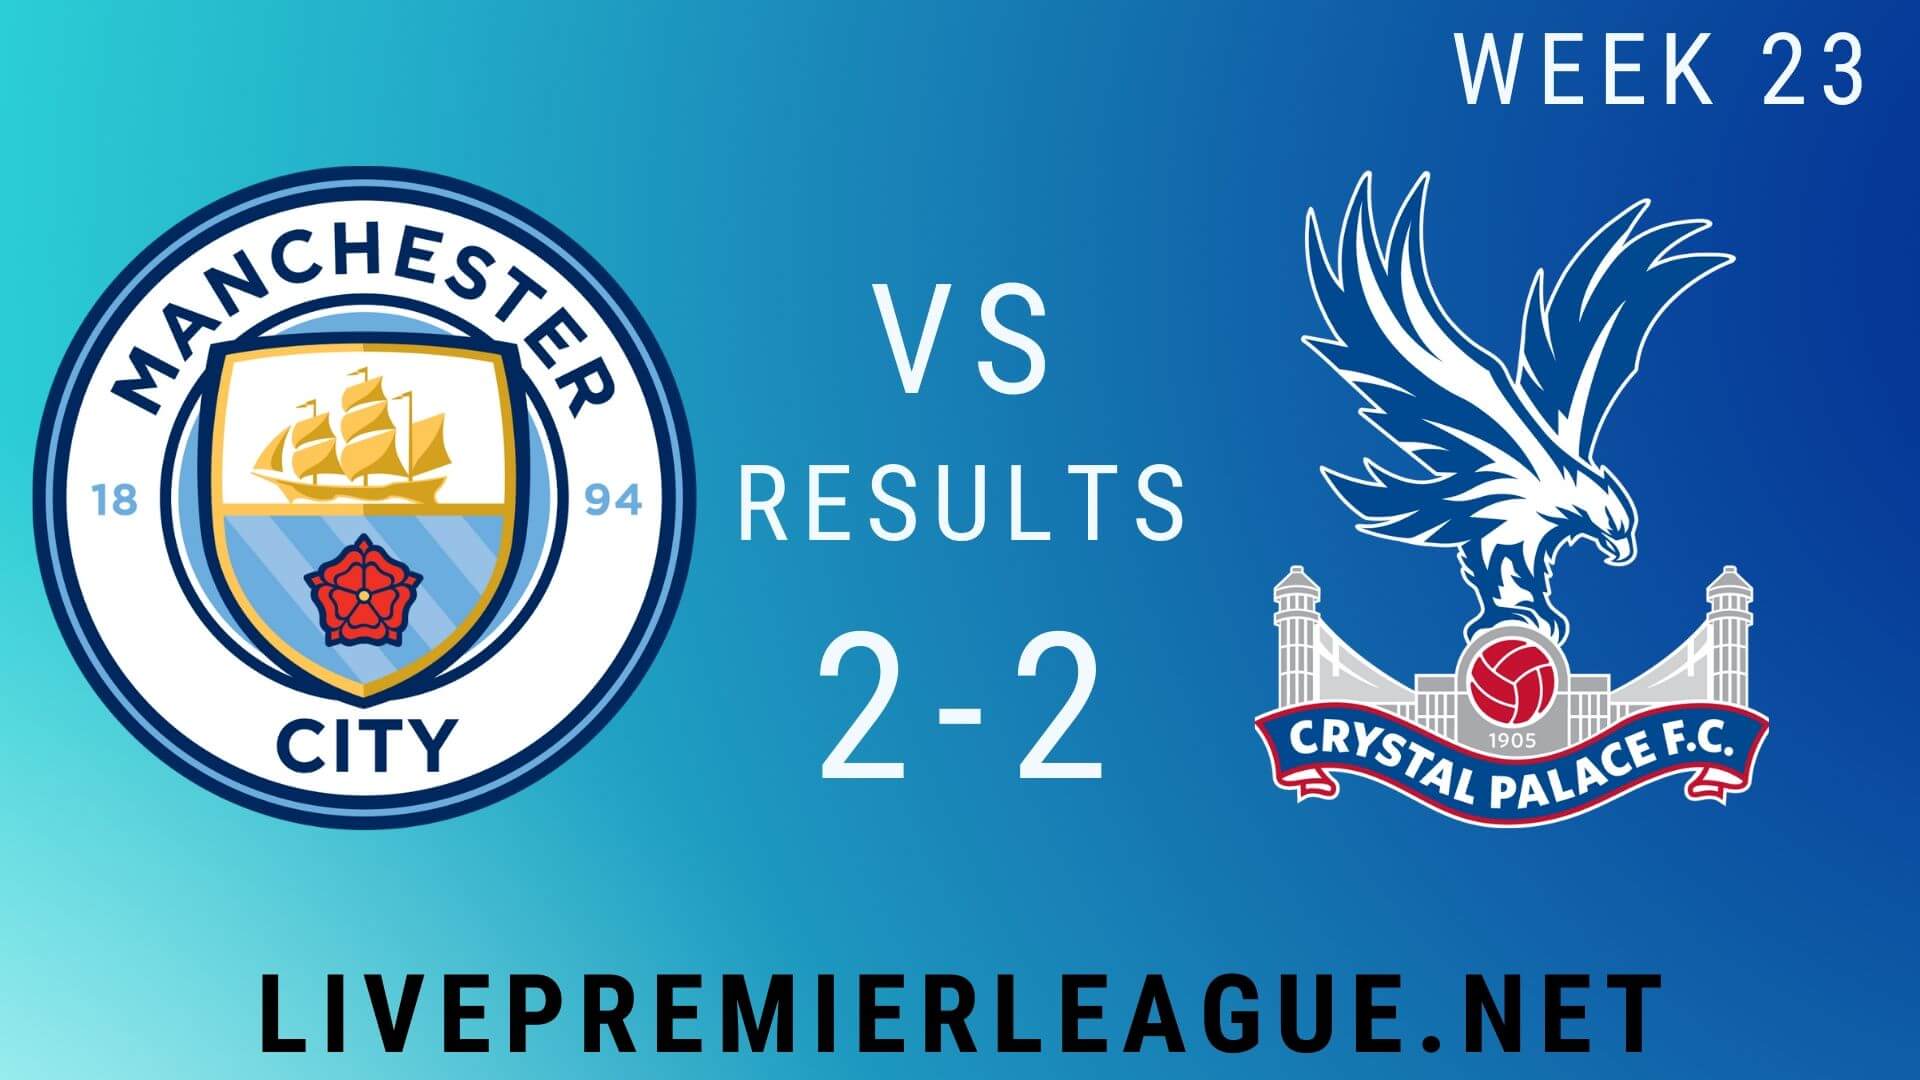 Manchester City Vs Crystal Palace | Week 23 Result 2020